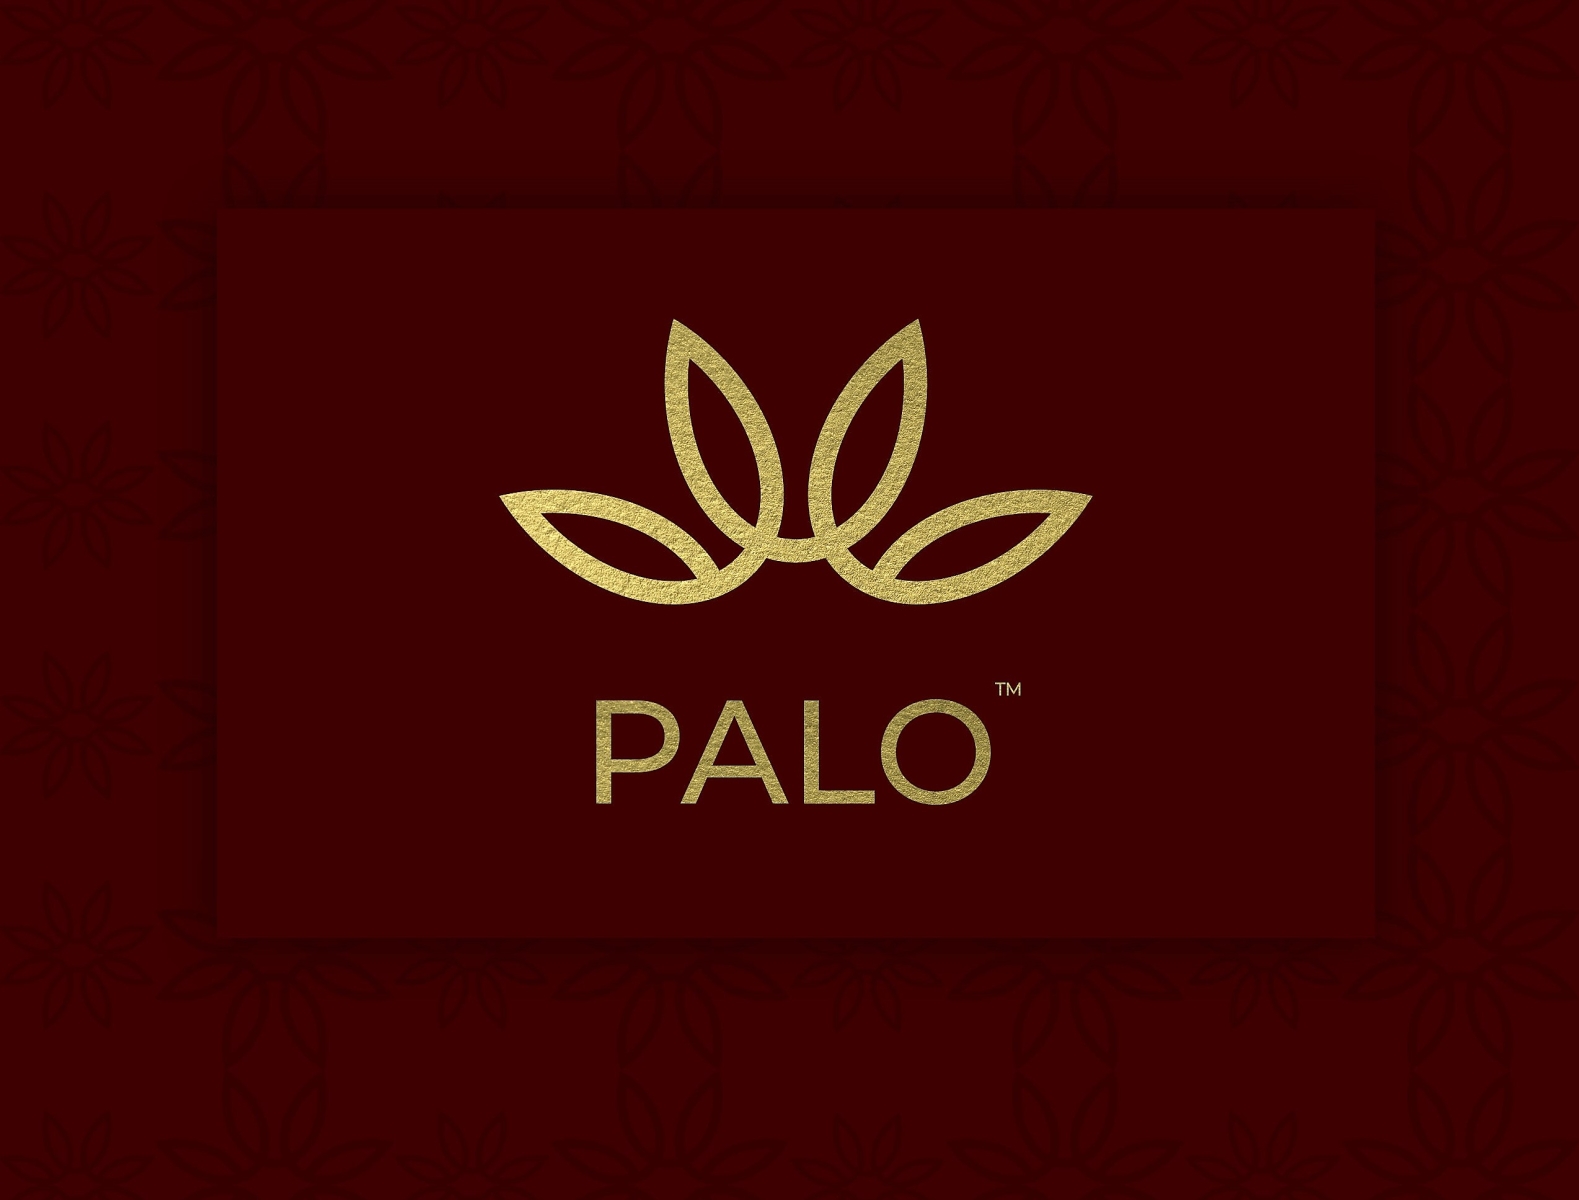 Palo Logo Design For Spanish Restaurant By Hassaan On Dribbble